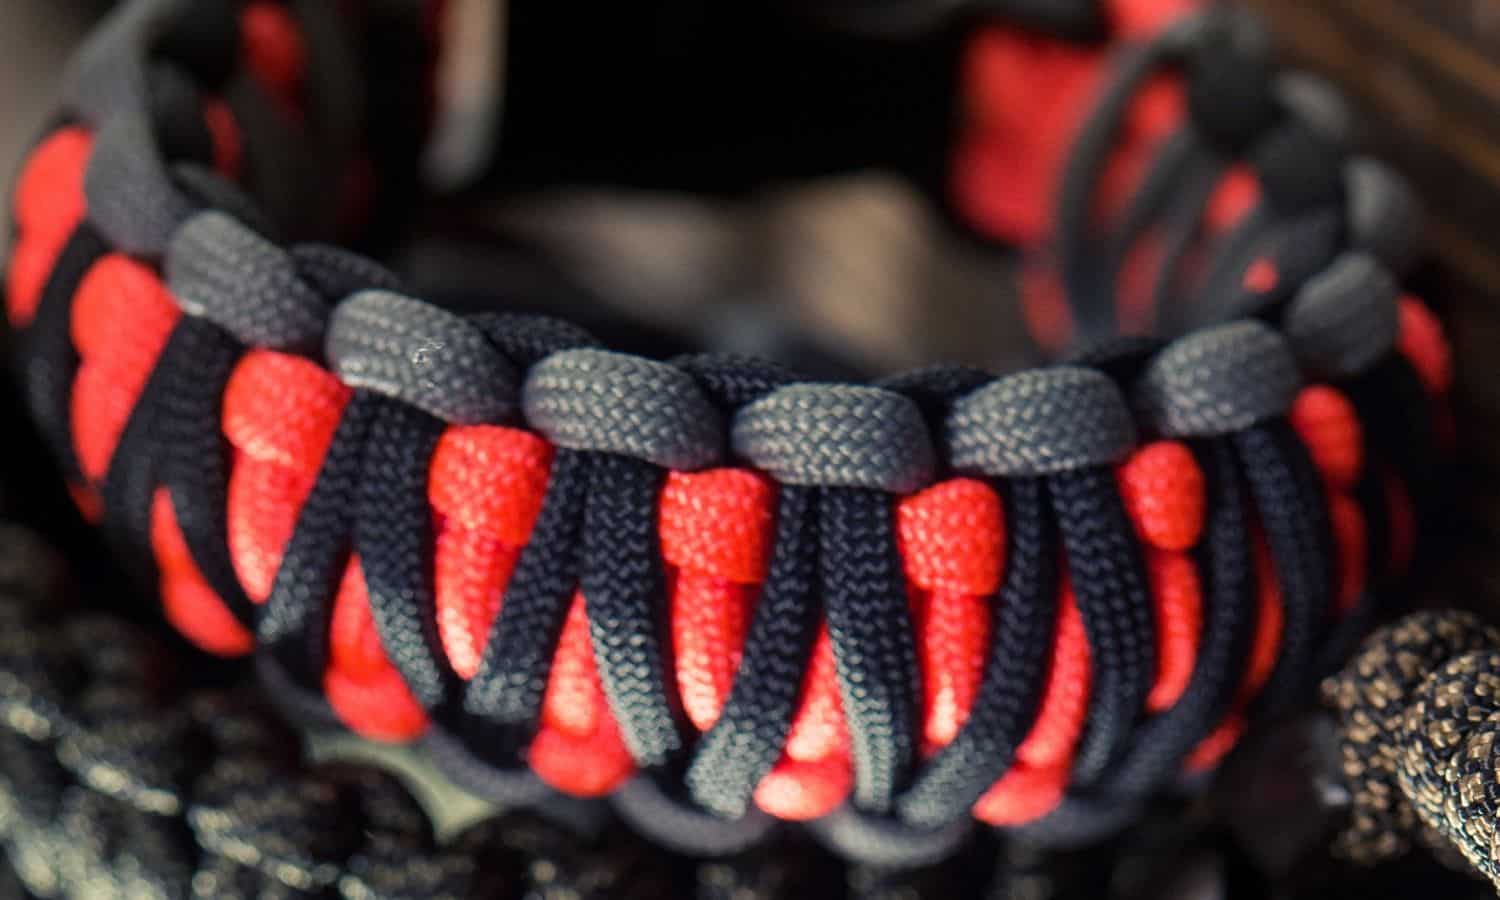 550 Paracord Knots: How To Tie Knots, Hitches, and Make Projects